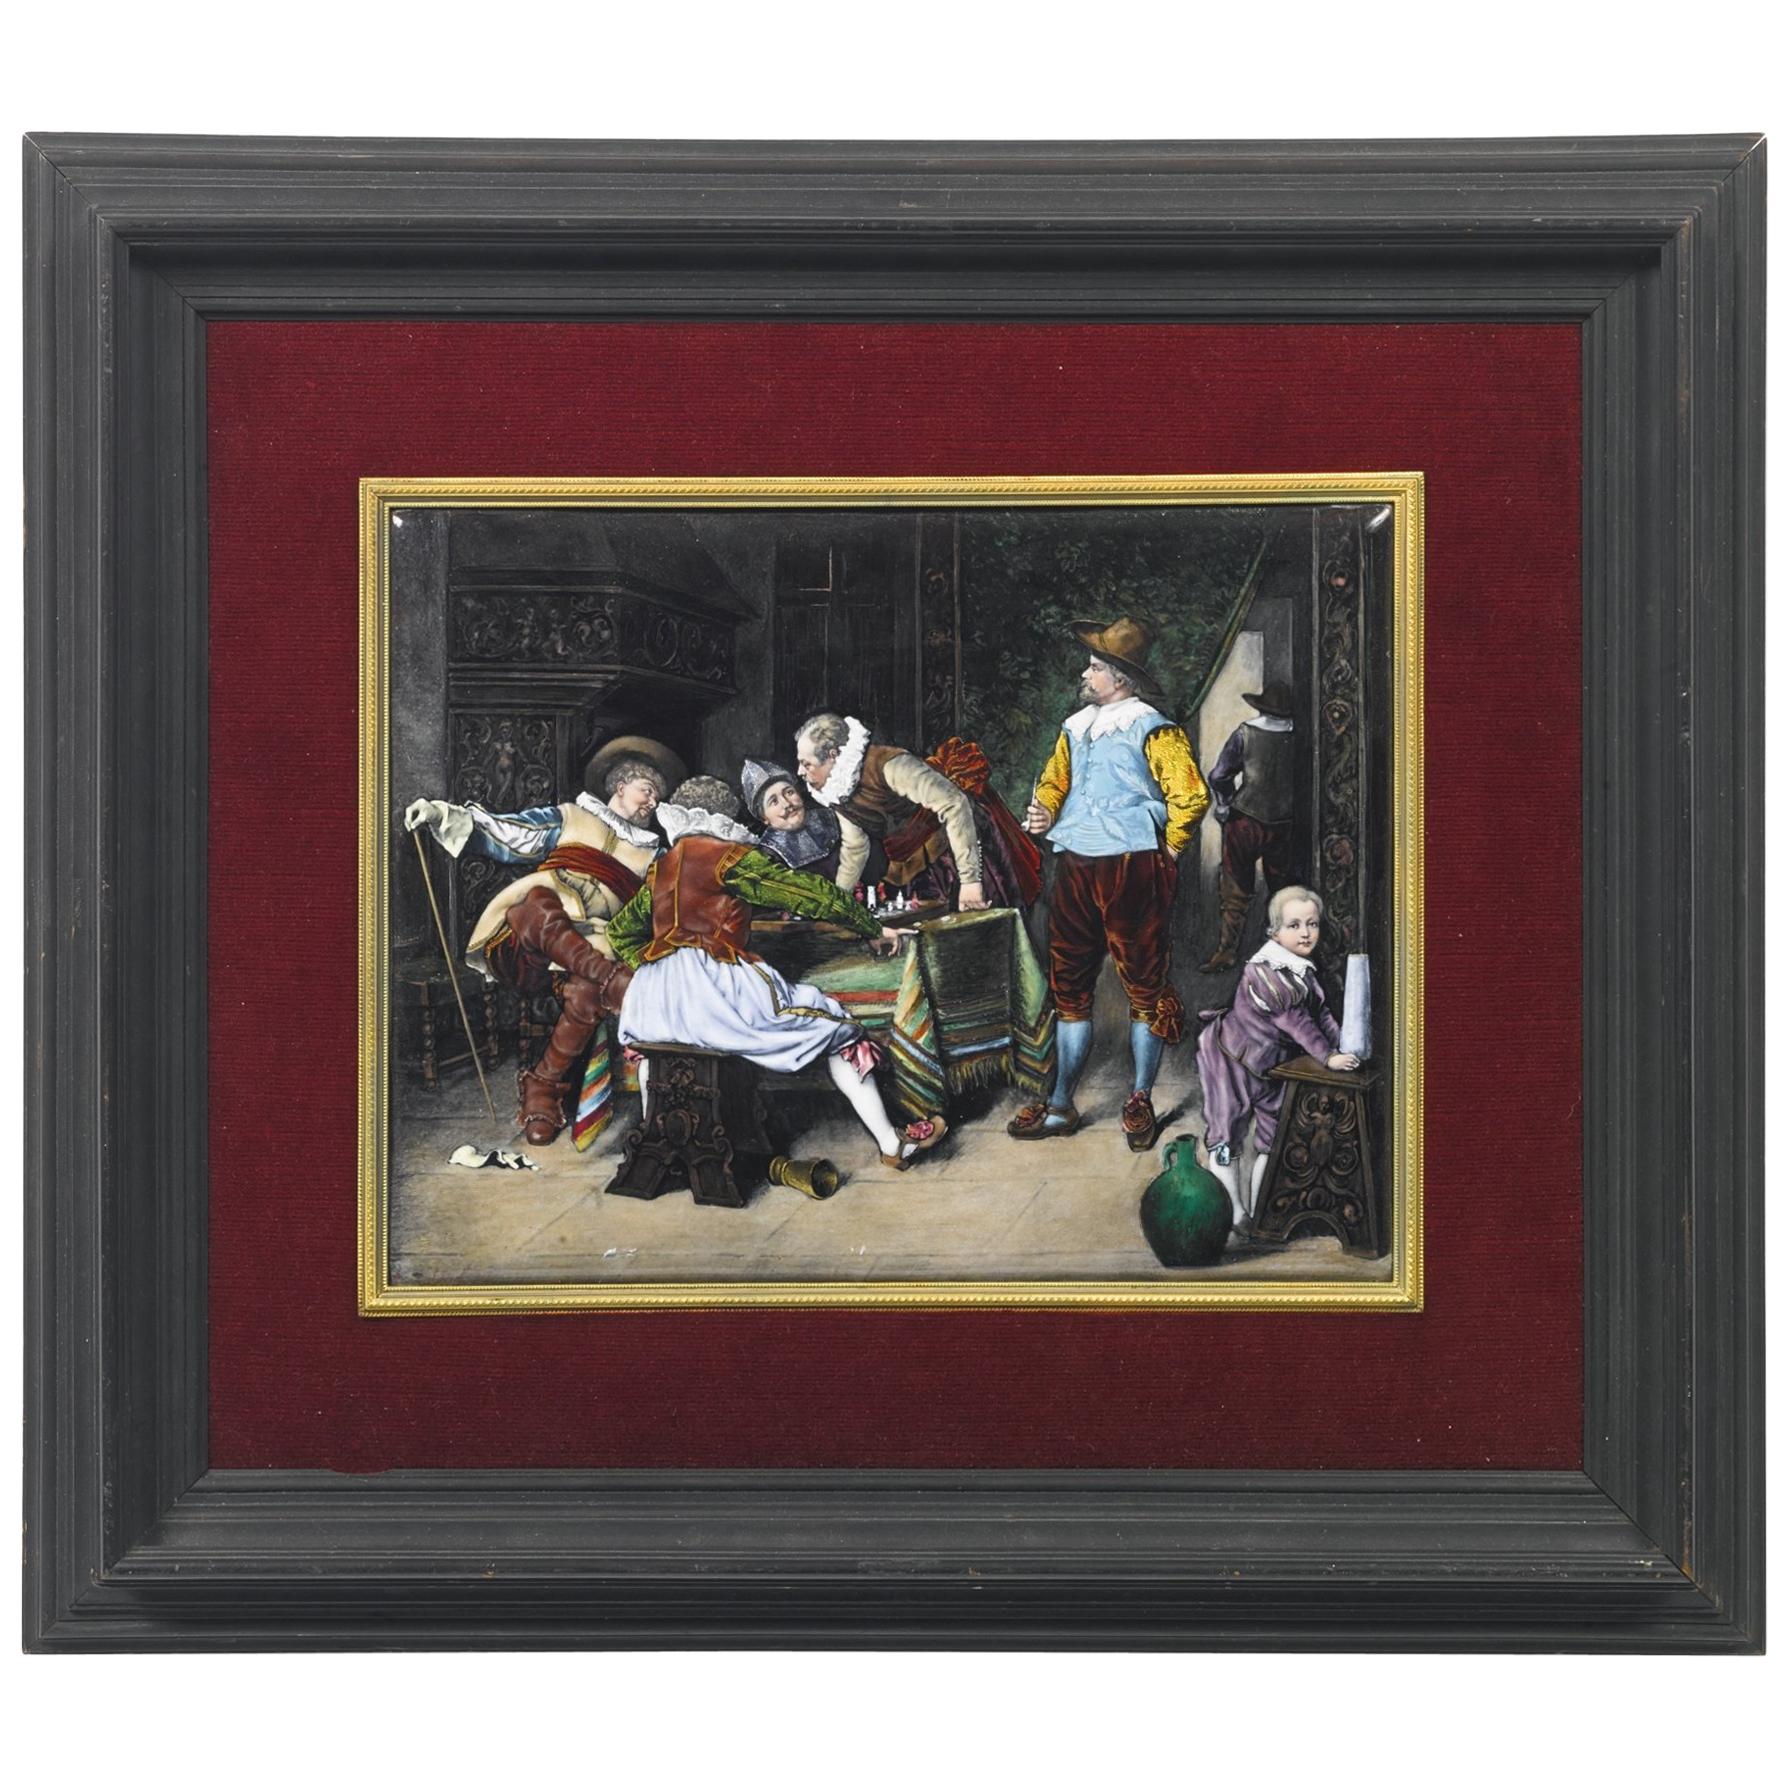 Théophile Soyer, Large Painted Enamel on Copper, "The Chess Game"